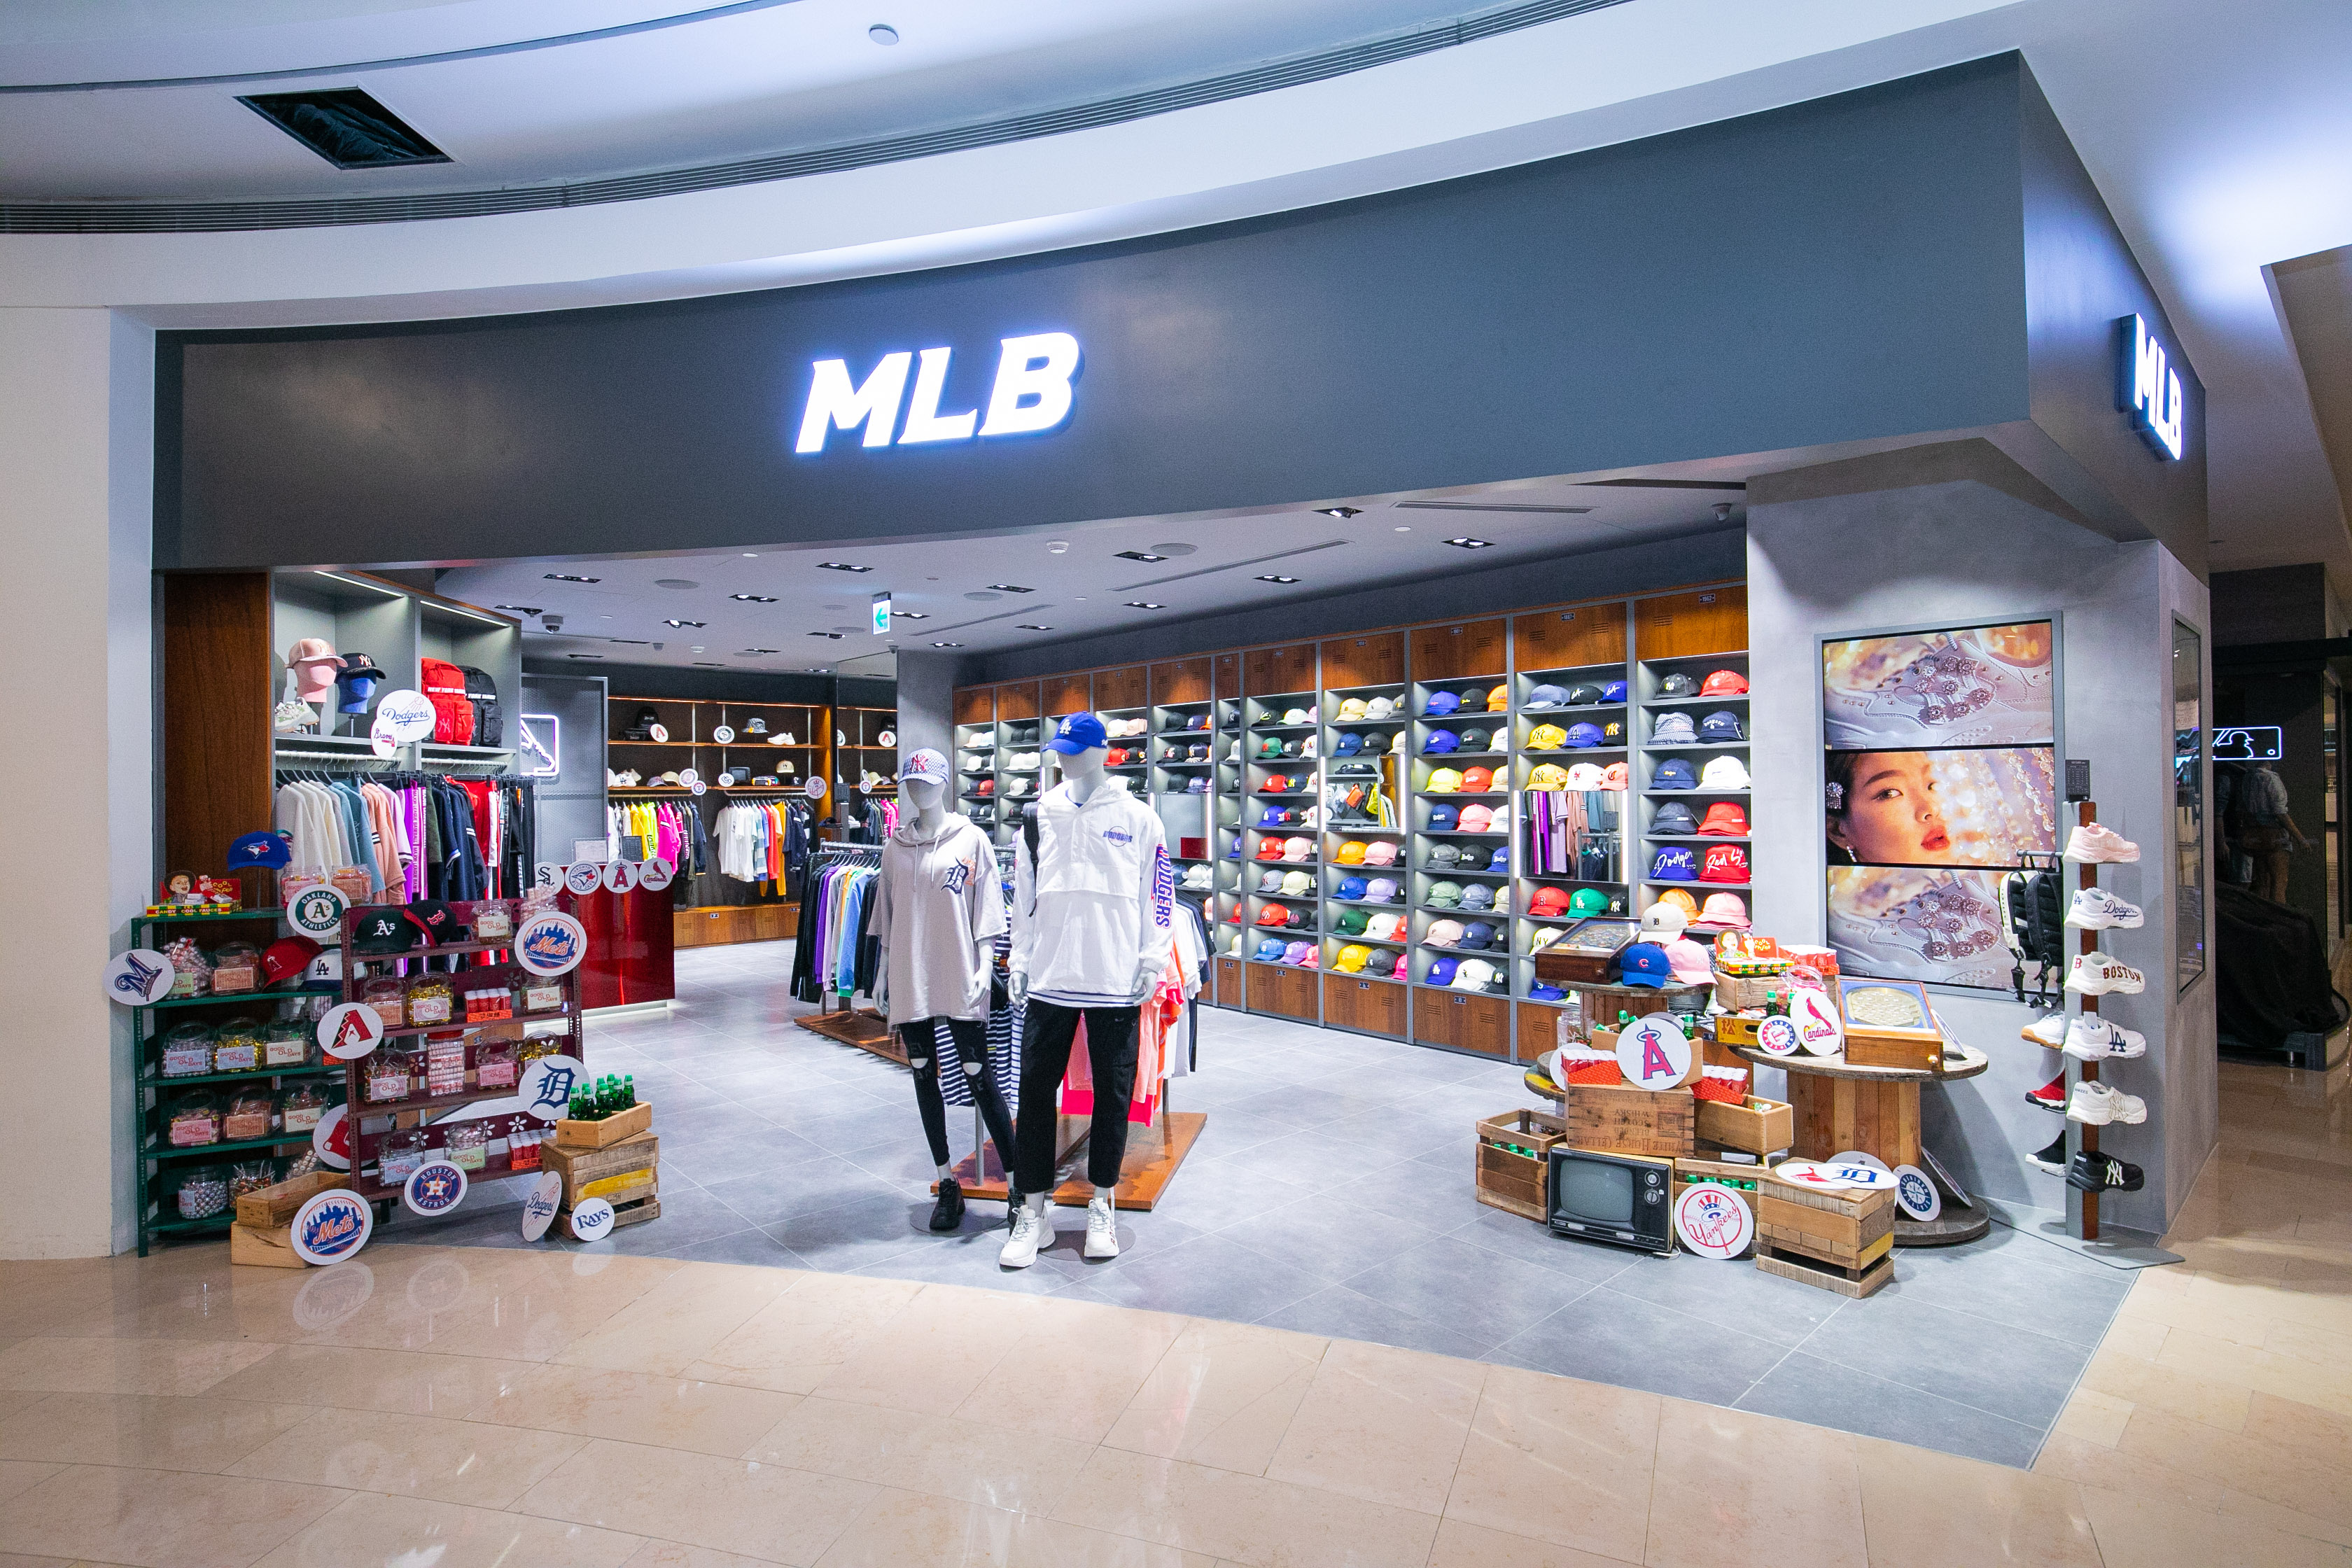 Mlb Shop rededuct